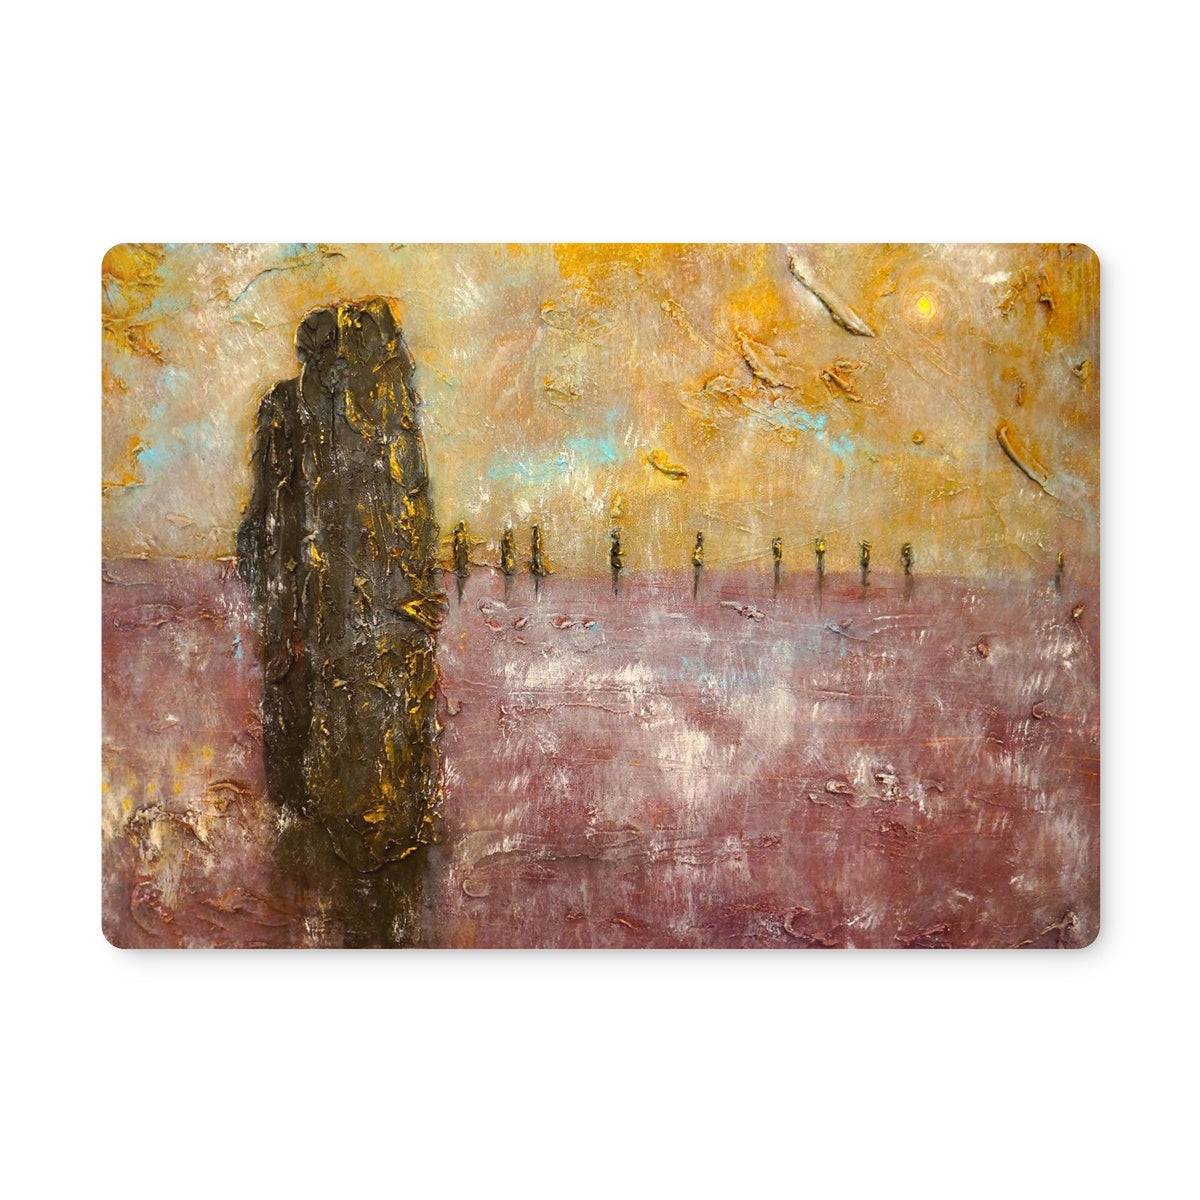 Bordgar Mist Orkney Art Gifts Placemat-Placemats-Orkney Art Gallery-6 Placemats-Paintings, Prints, Homeware, Art Gifts From Scotland By Scottish Artist Kevin Hunter